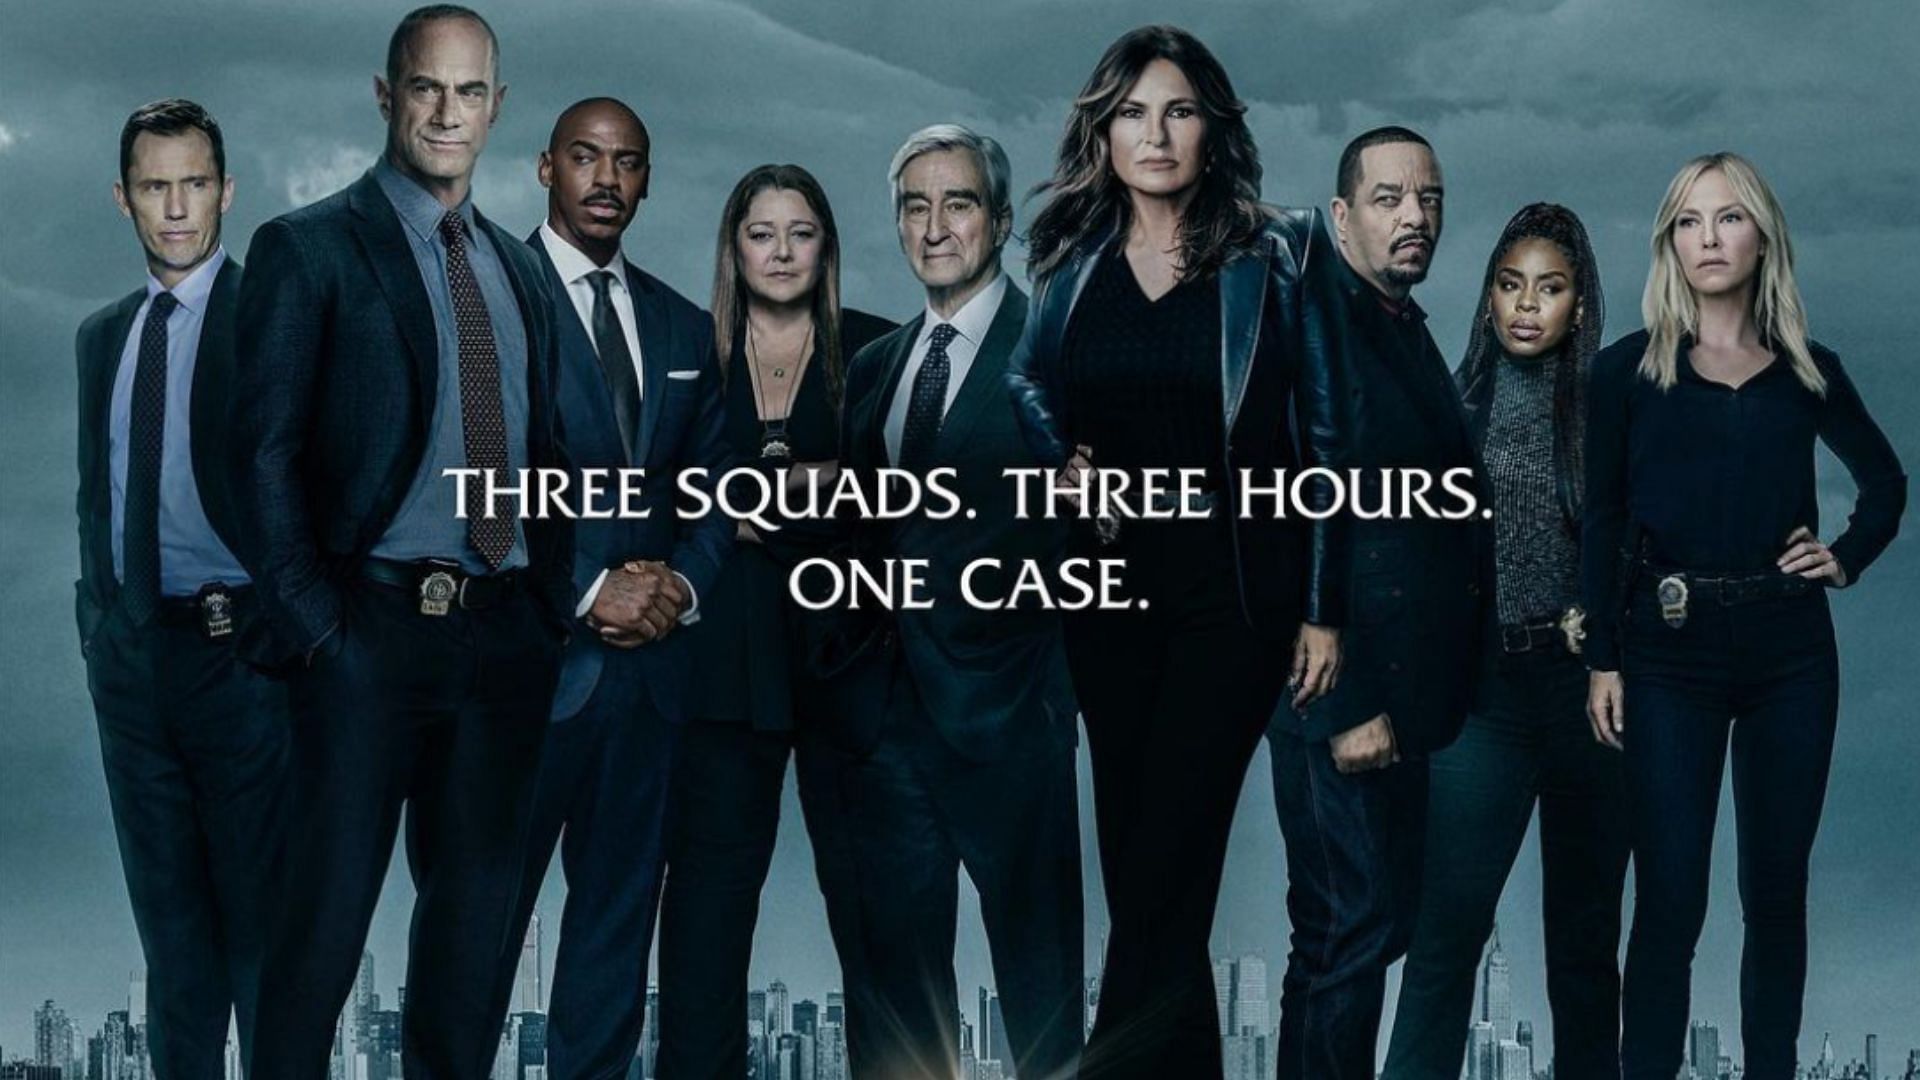 Law & Order 3part crossover event in 2022 5 things to know